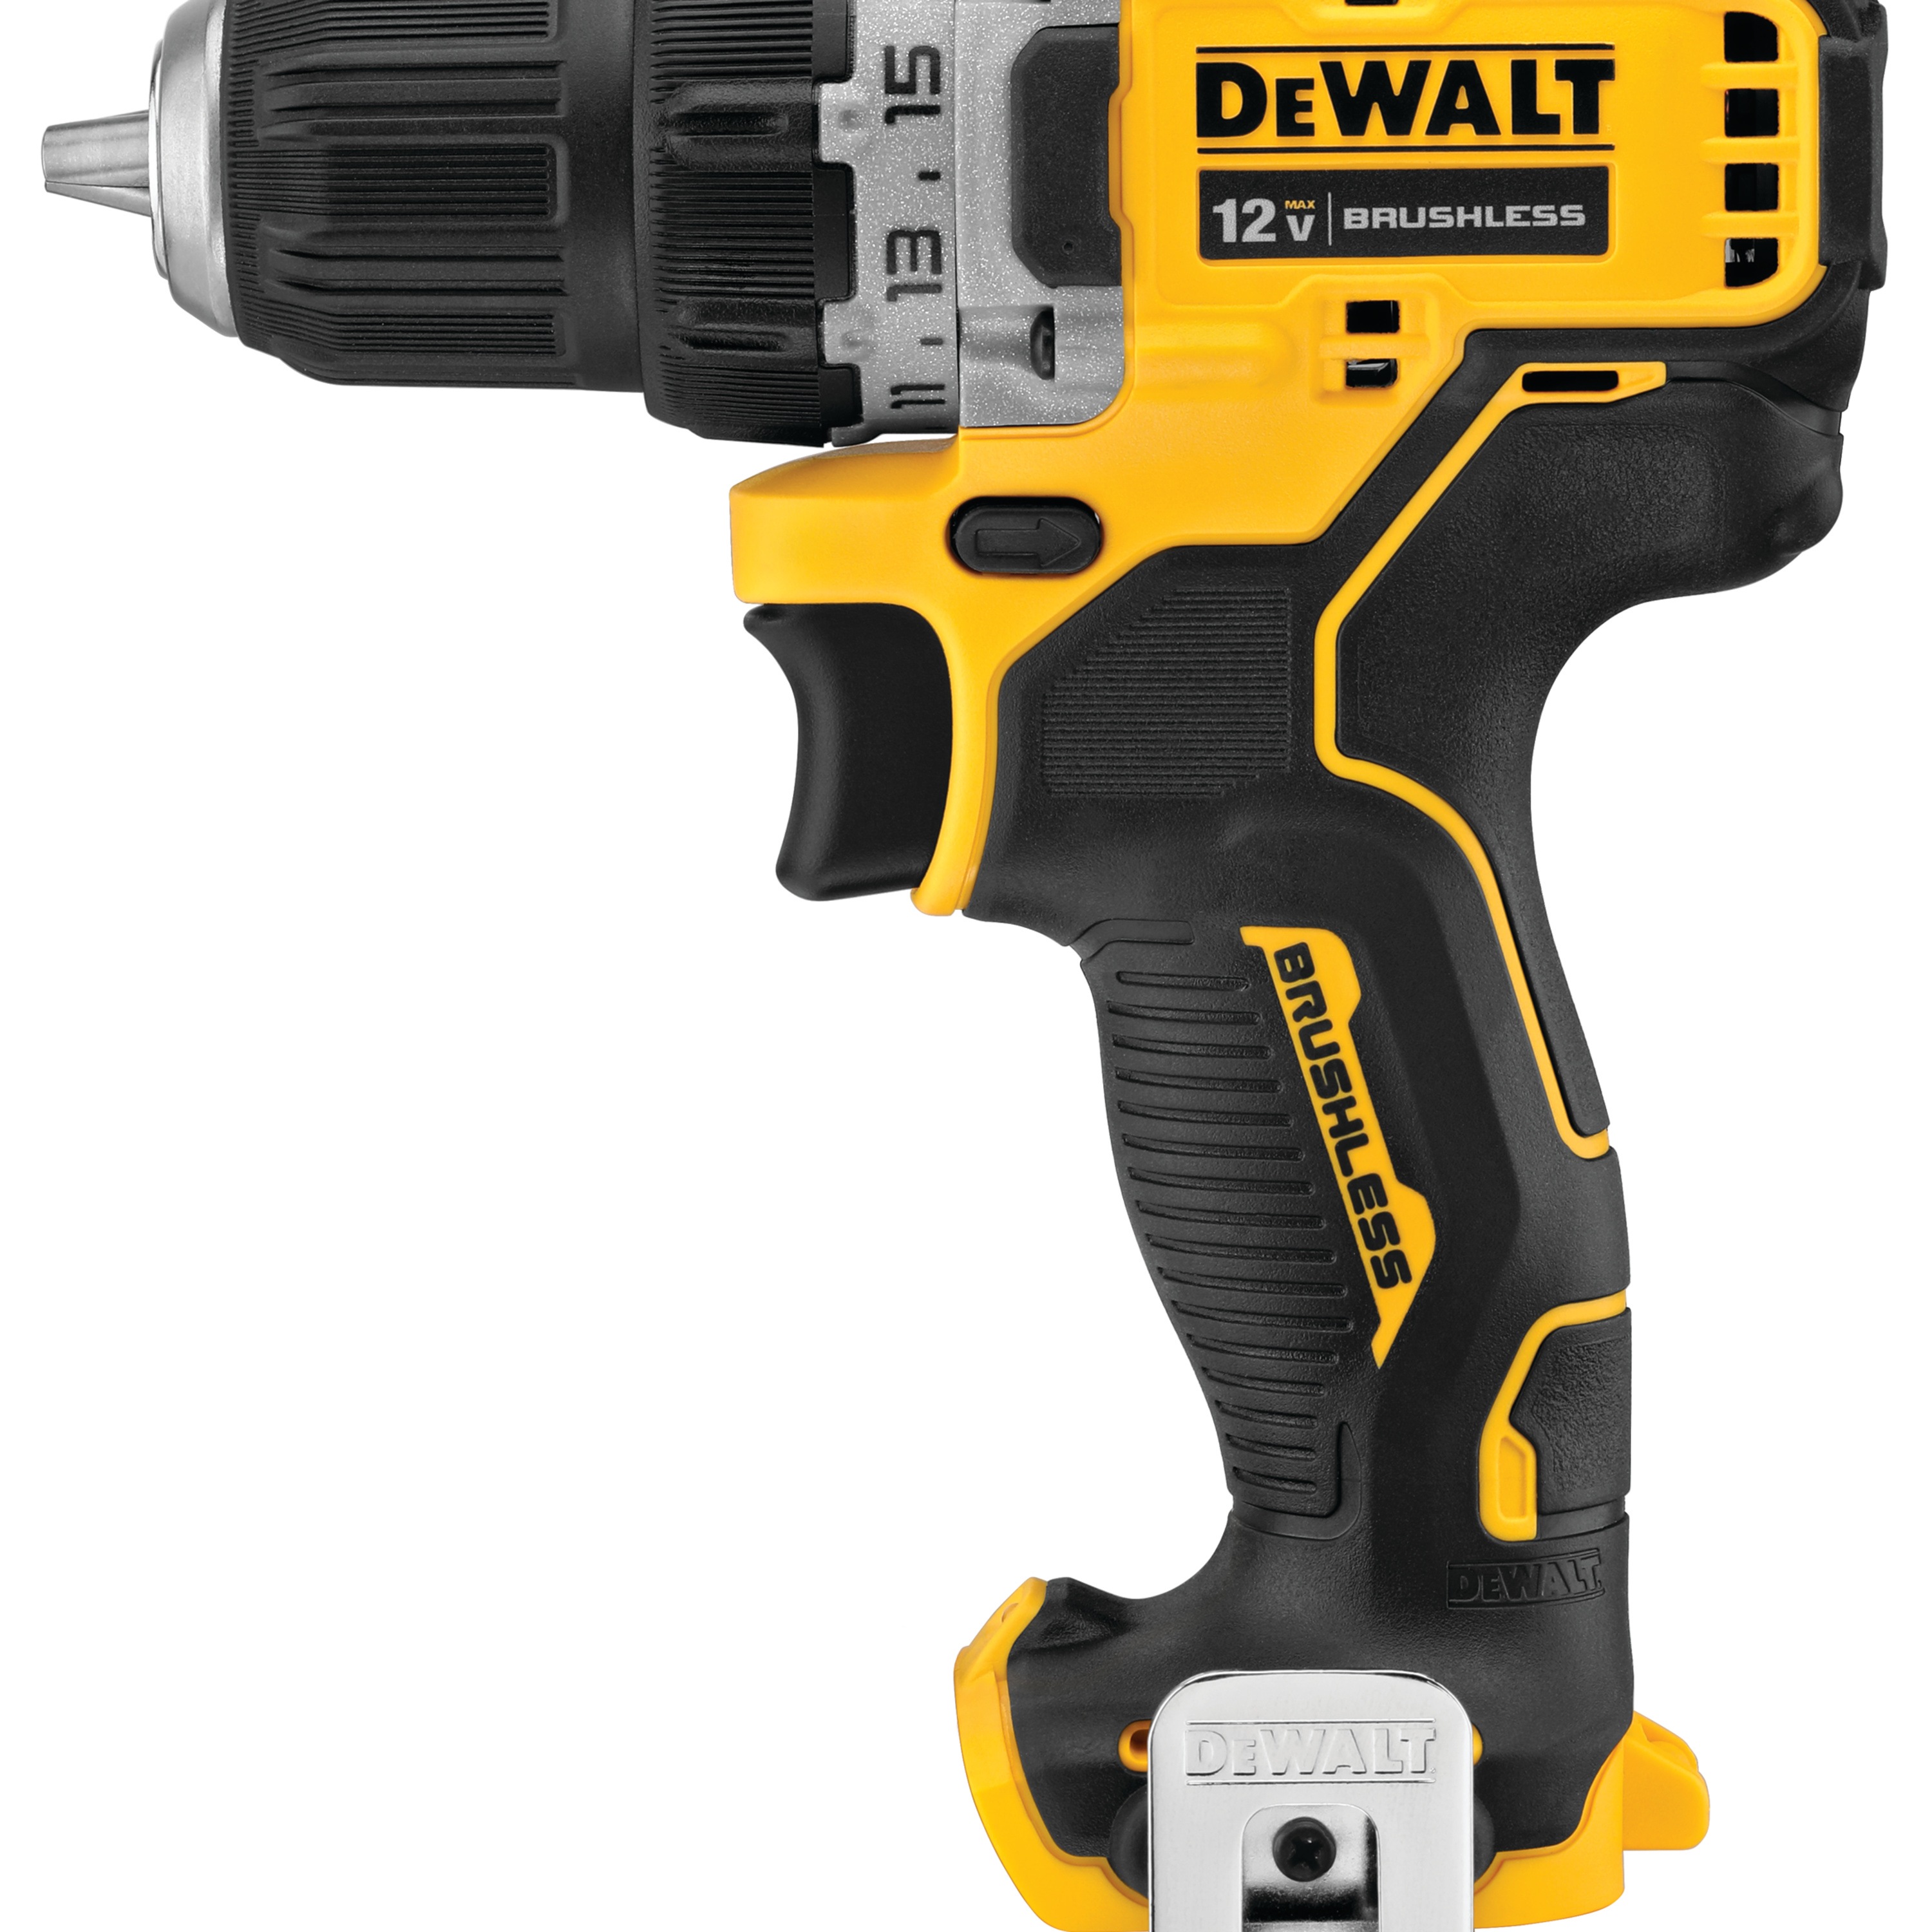 Profile of Brushless cordless drill driver 